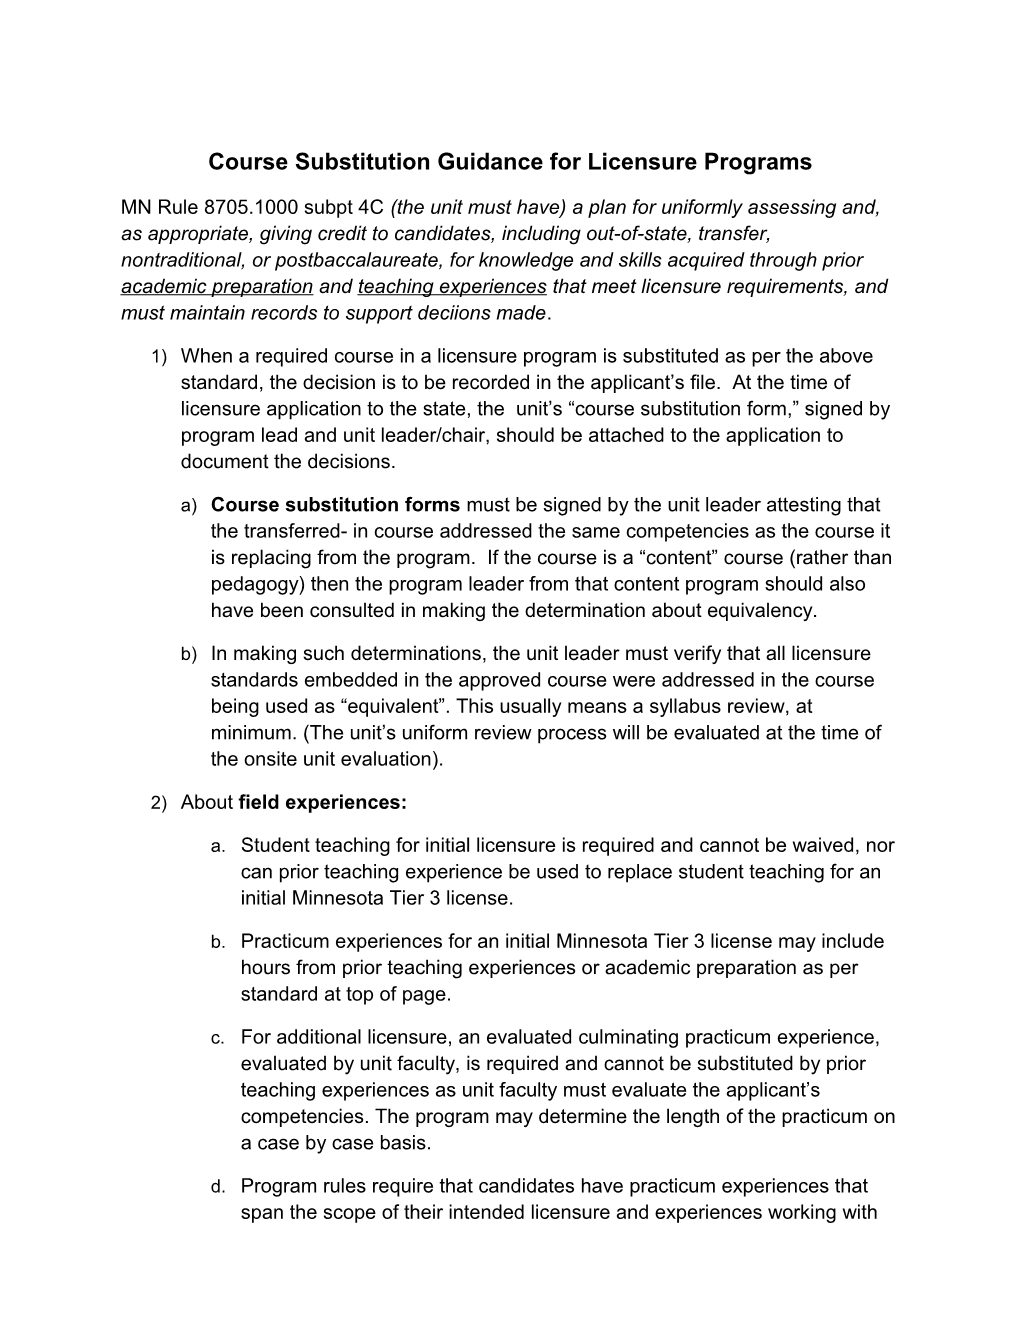 Course Substitution Guidance for Licensure Programs